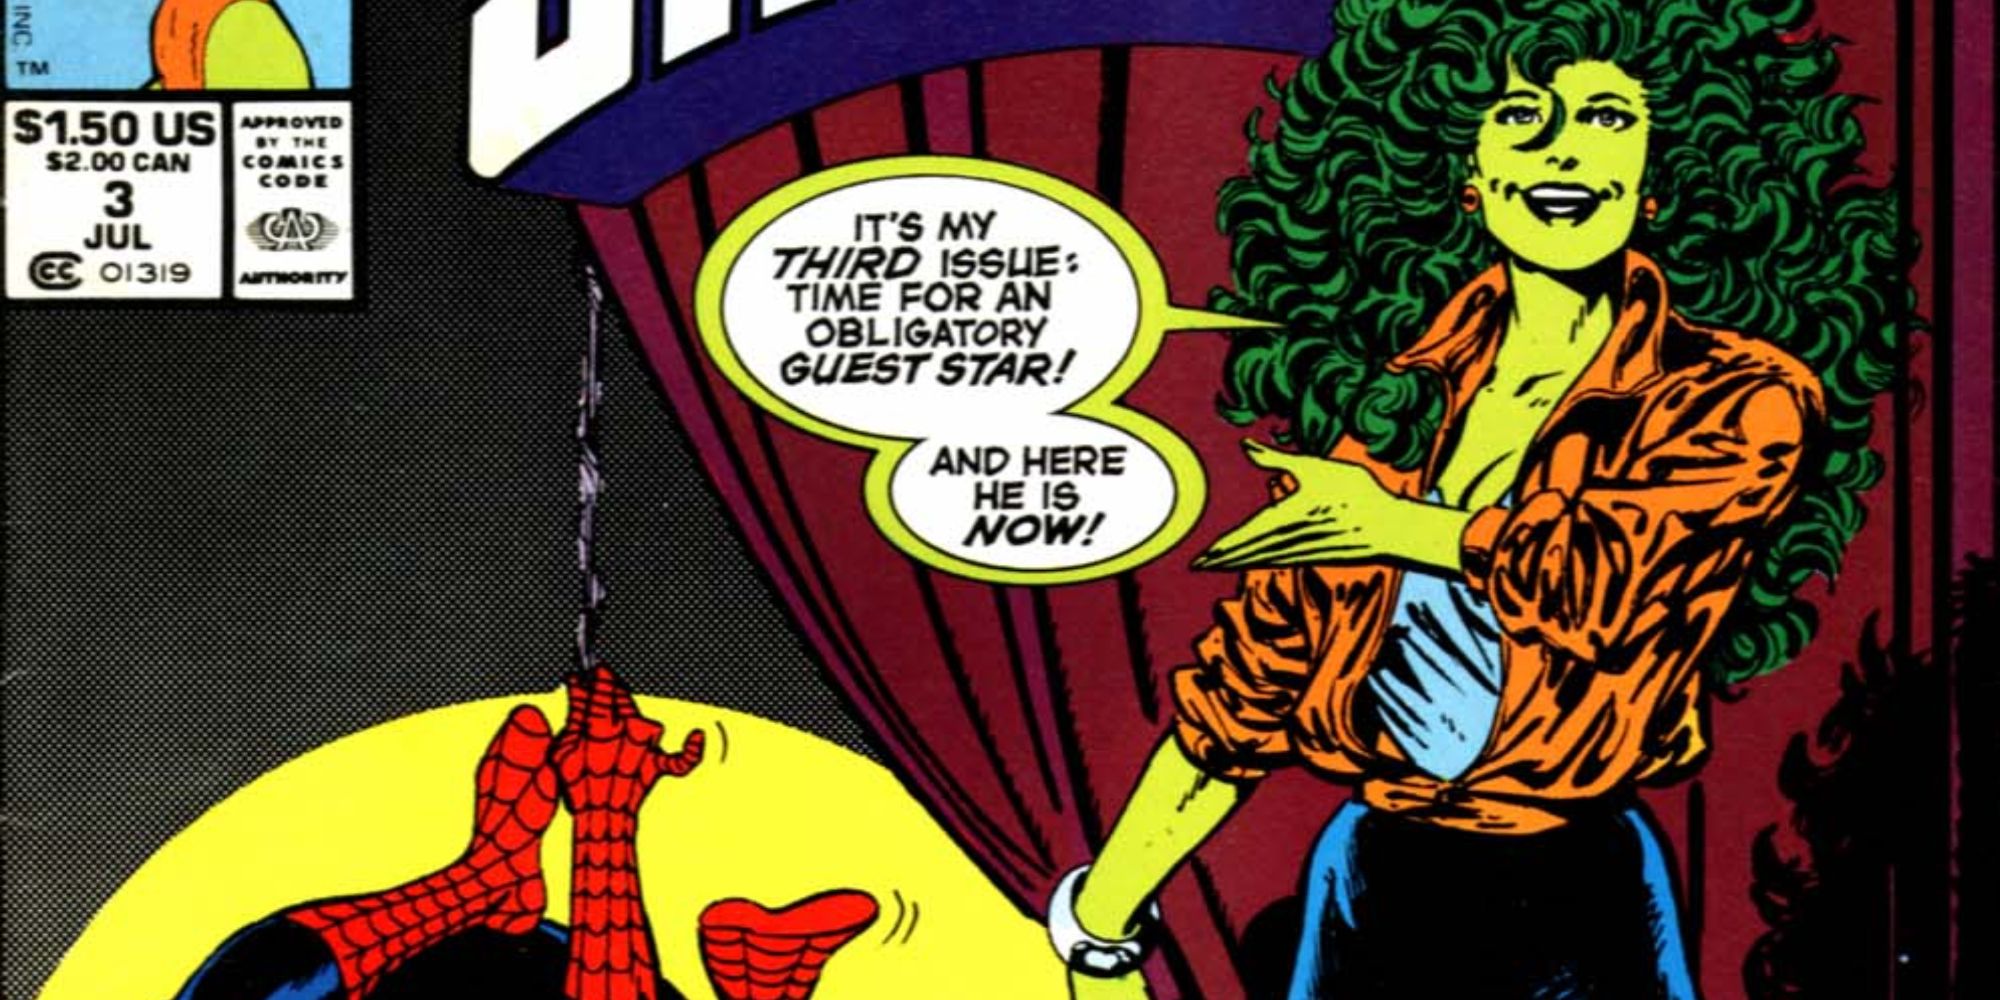 She-Hulk appears with Spider-Man on the cover of Sensational She-Hulk 3.